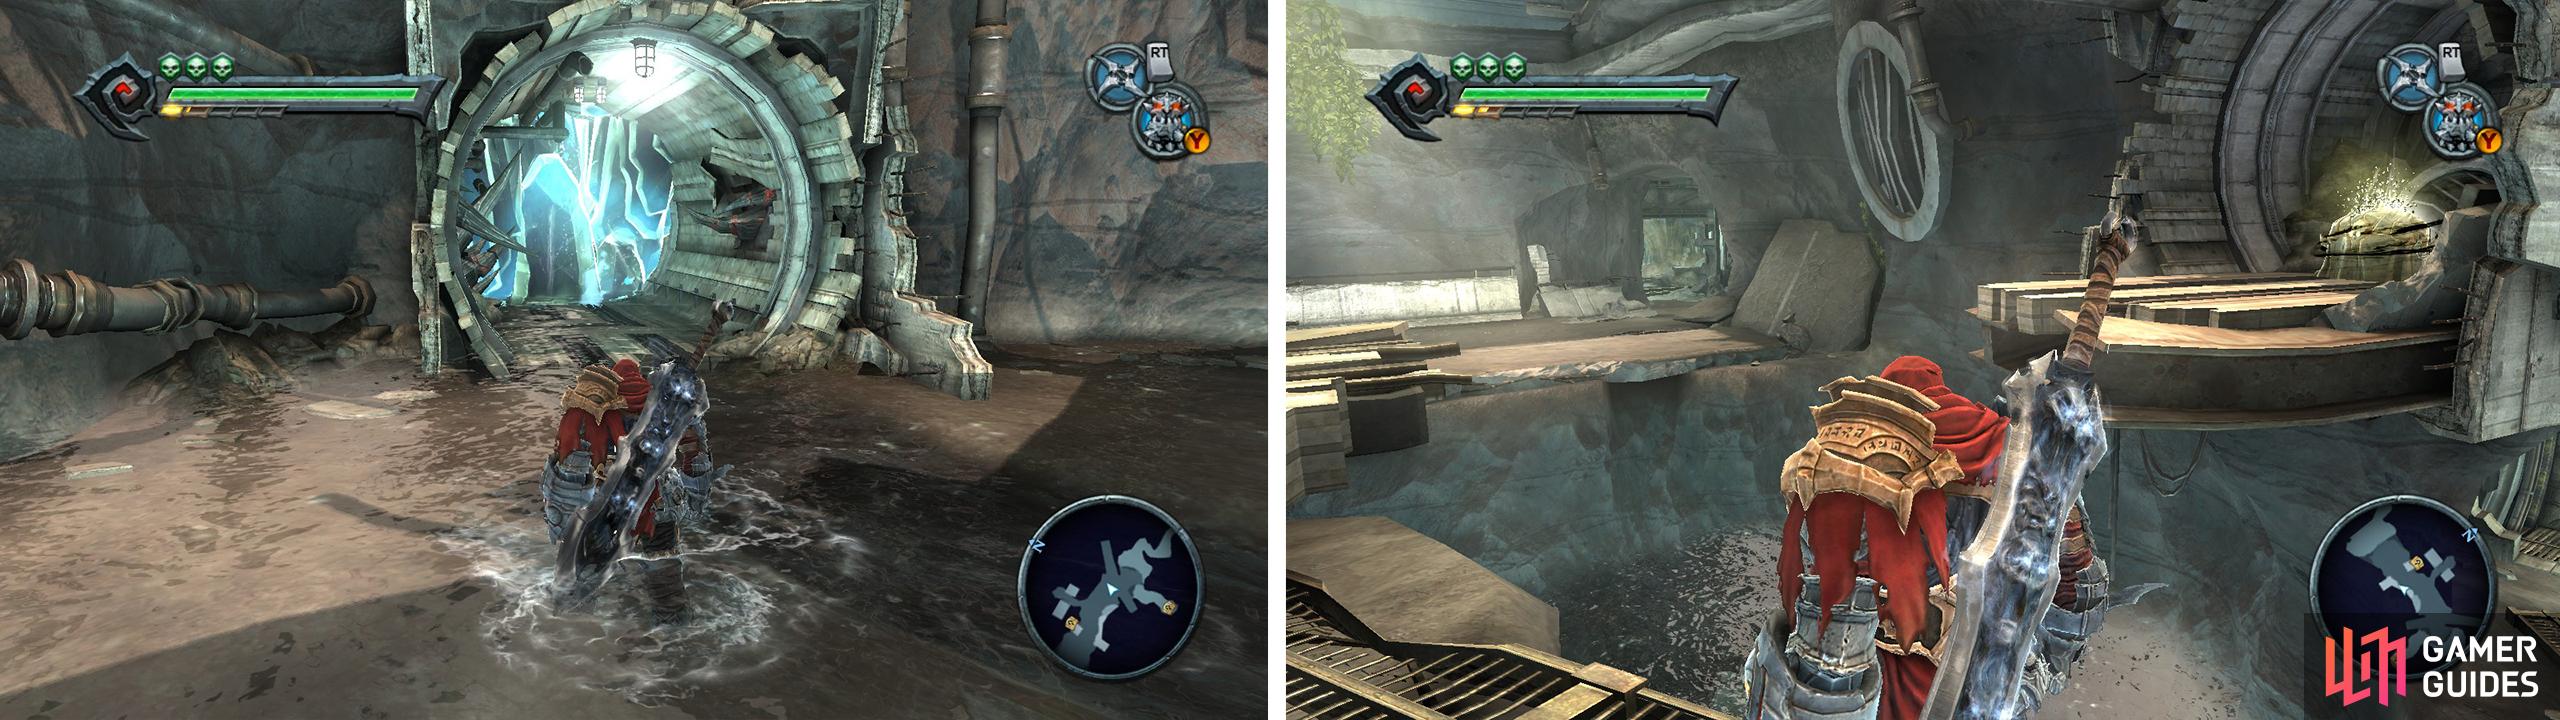 Destroy the blue crystal in the far tunnel (left) to release water. Before destroying the second blue crystal, jump across the gap for a Wrath Shard (right).